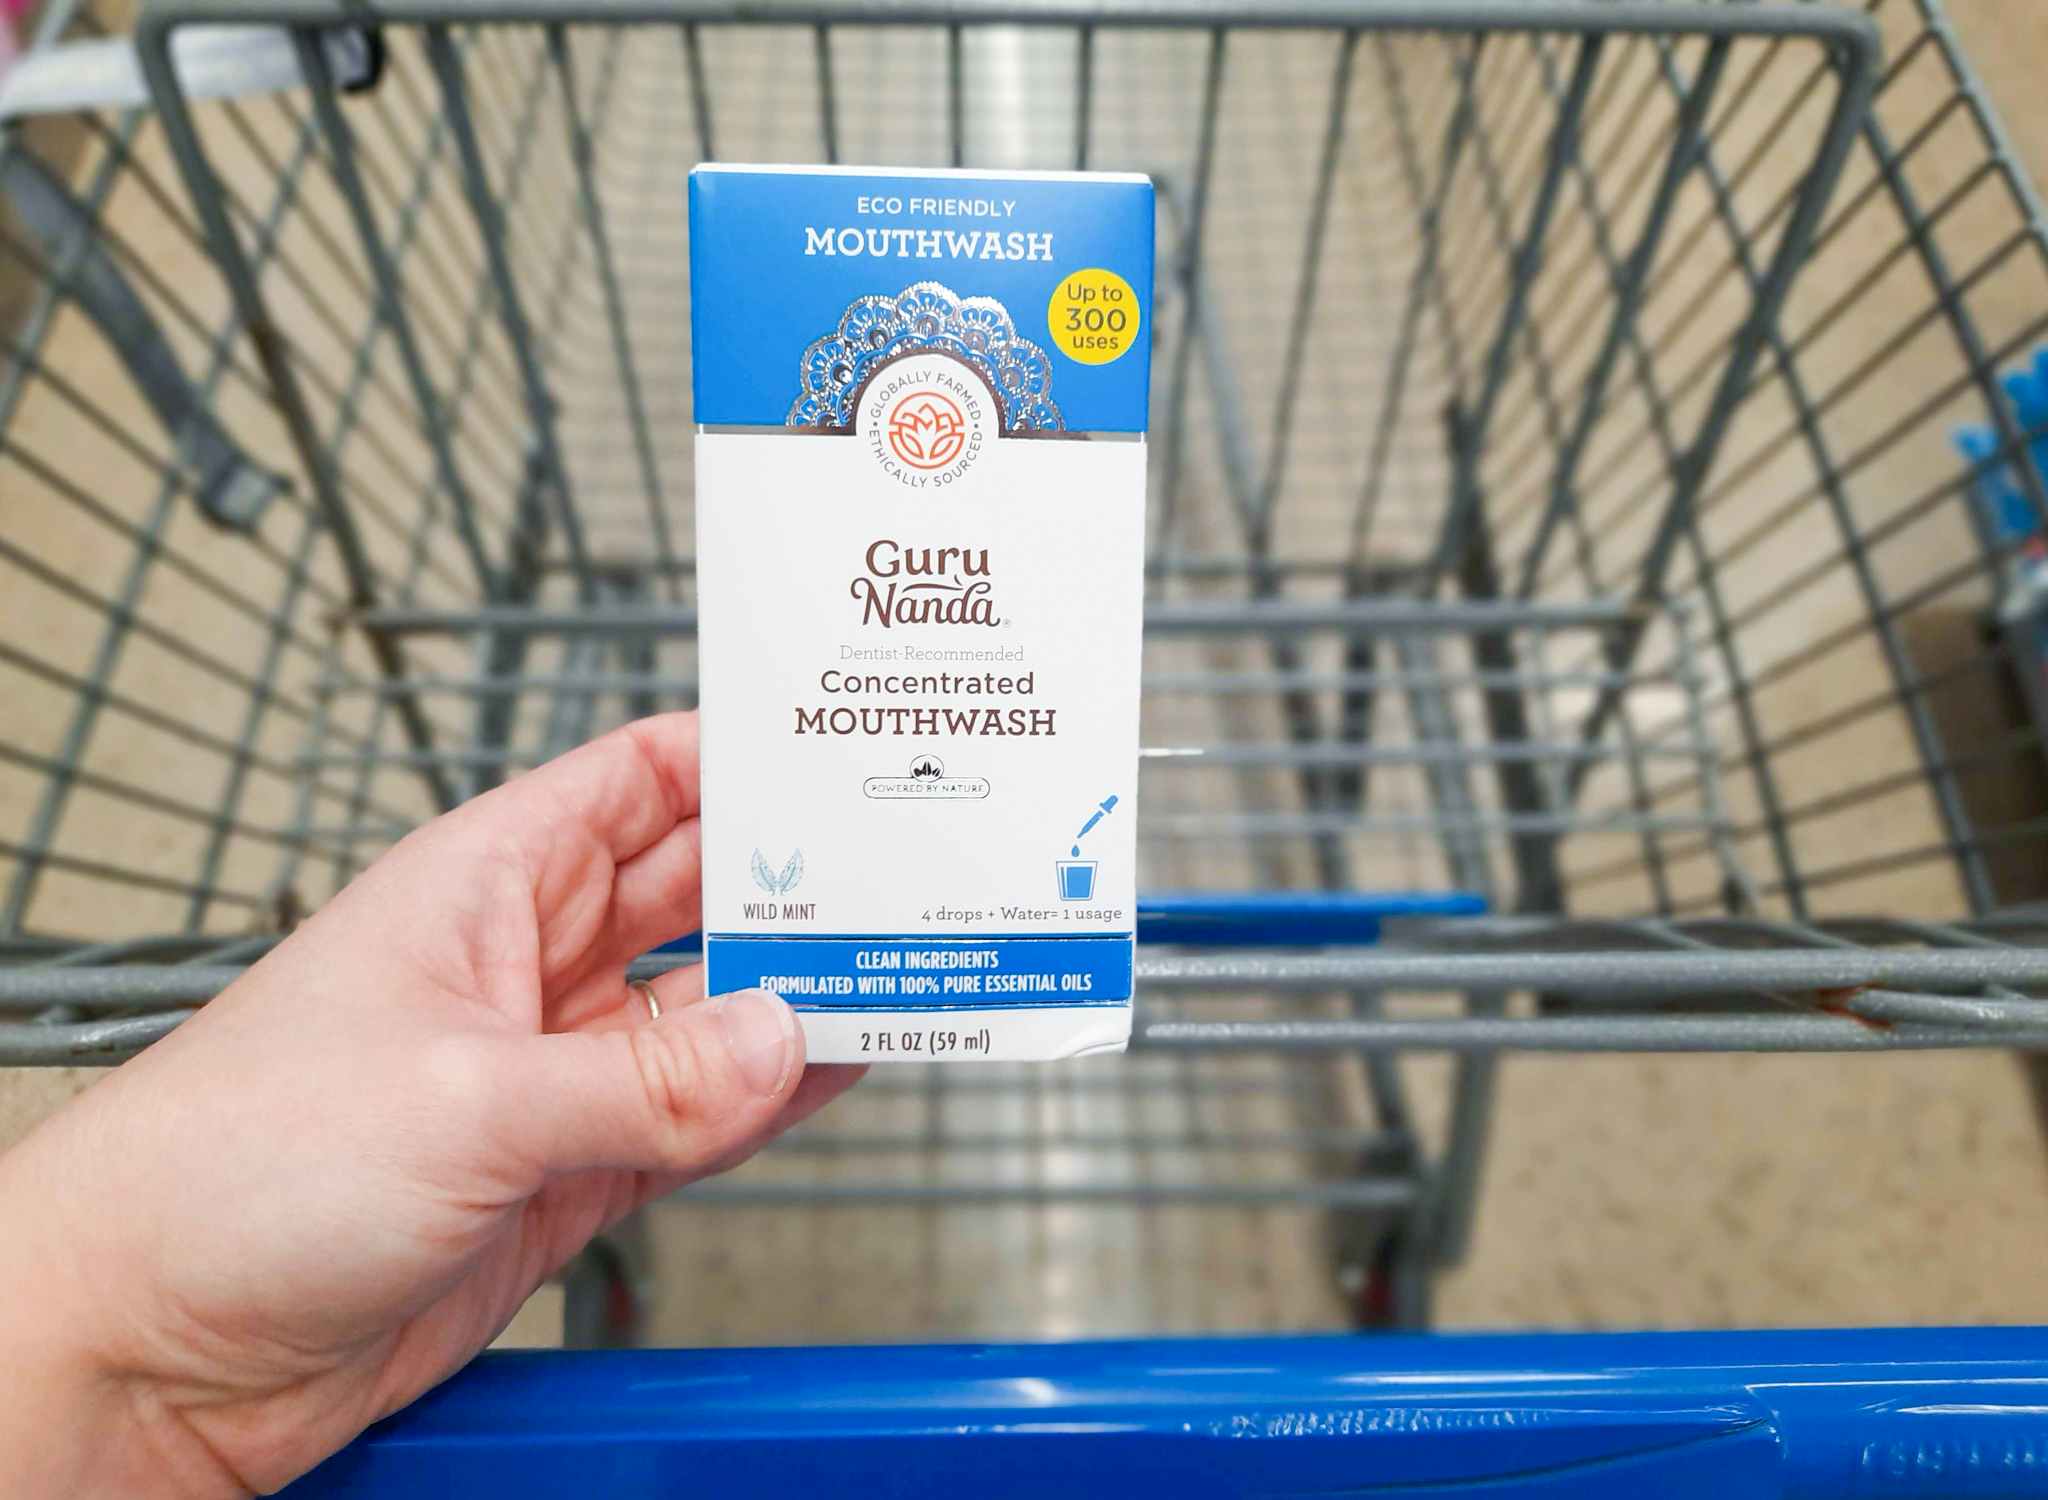 GuruNanda Concentrated Mouthwash product held over Walmart shopping cart